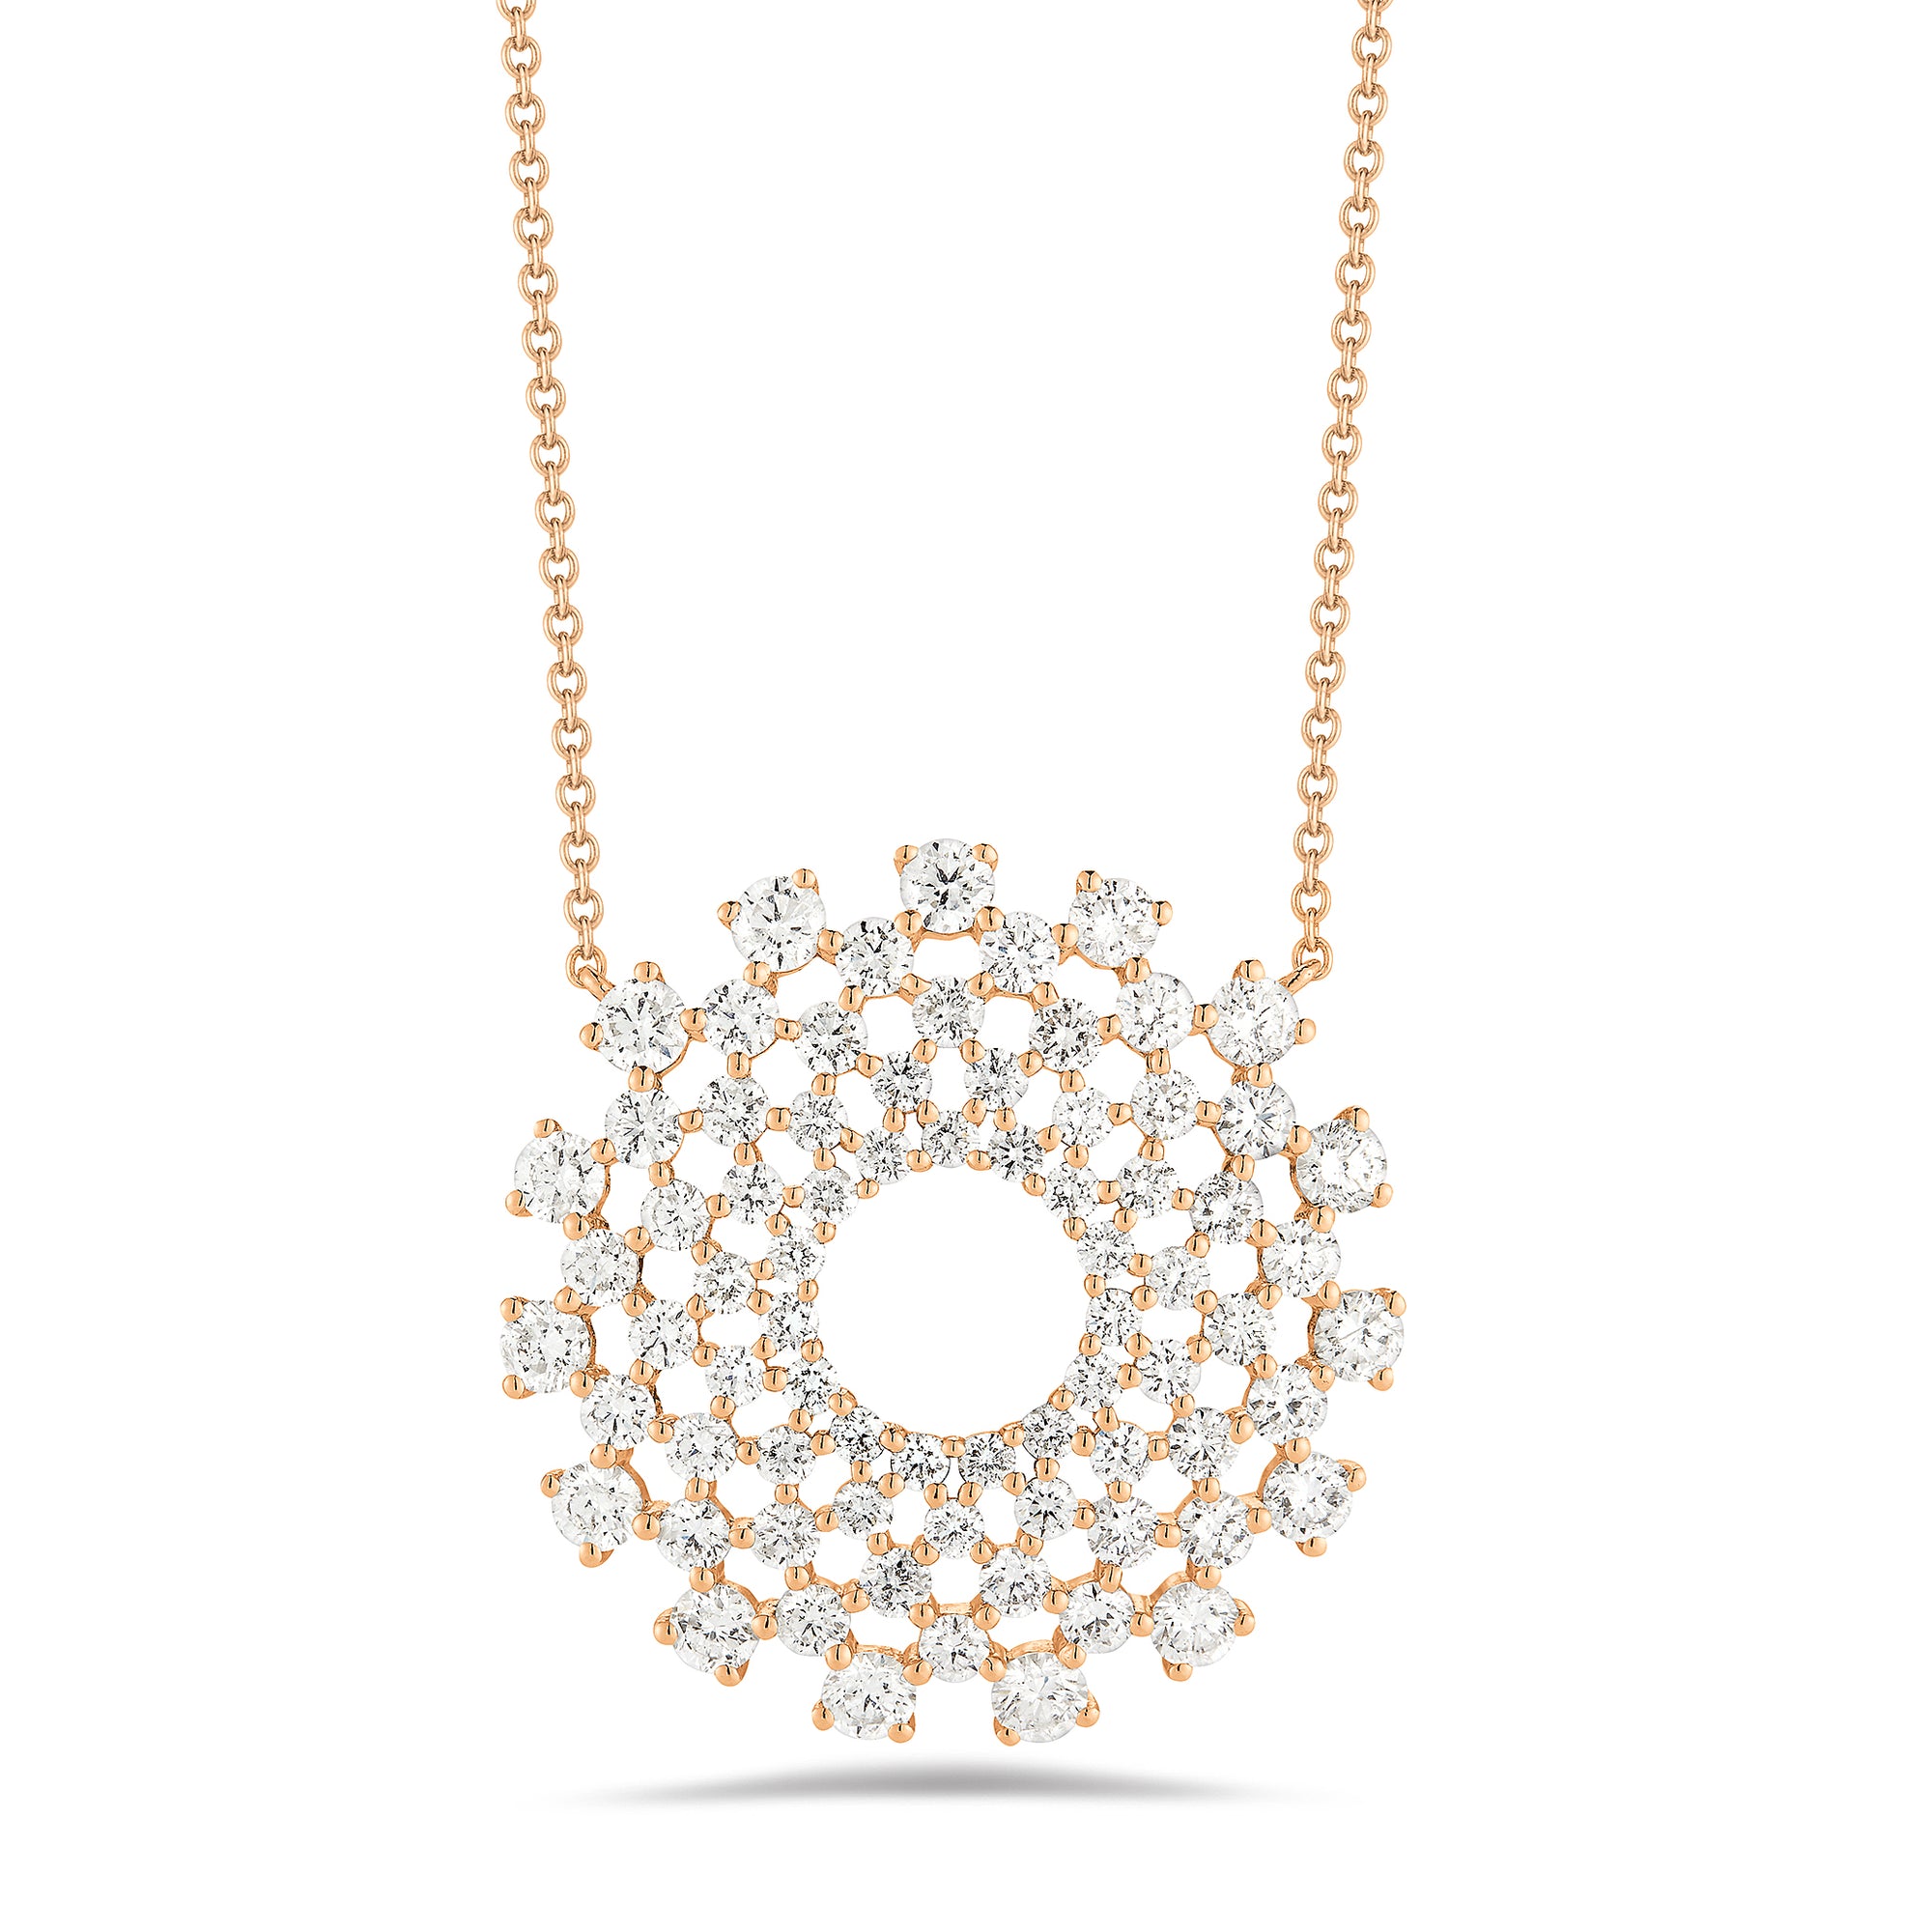  Diamond Intricate Sunburst Necklace  -14k gold weighing 1.92 grams     -75 round prong-set diamonds totaling 2.11 carats, F-G color S12 clarity.